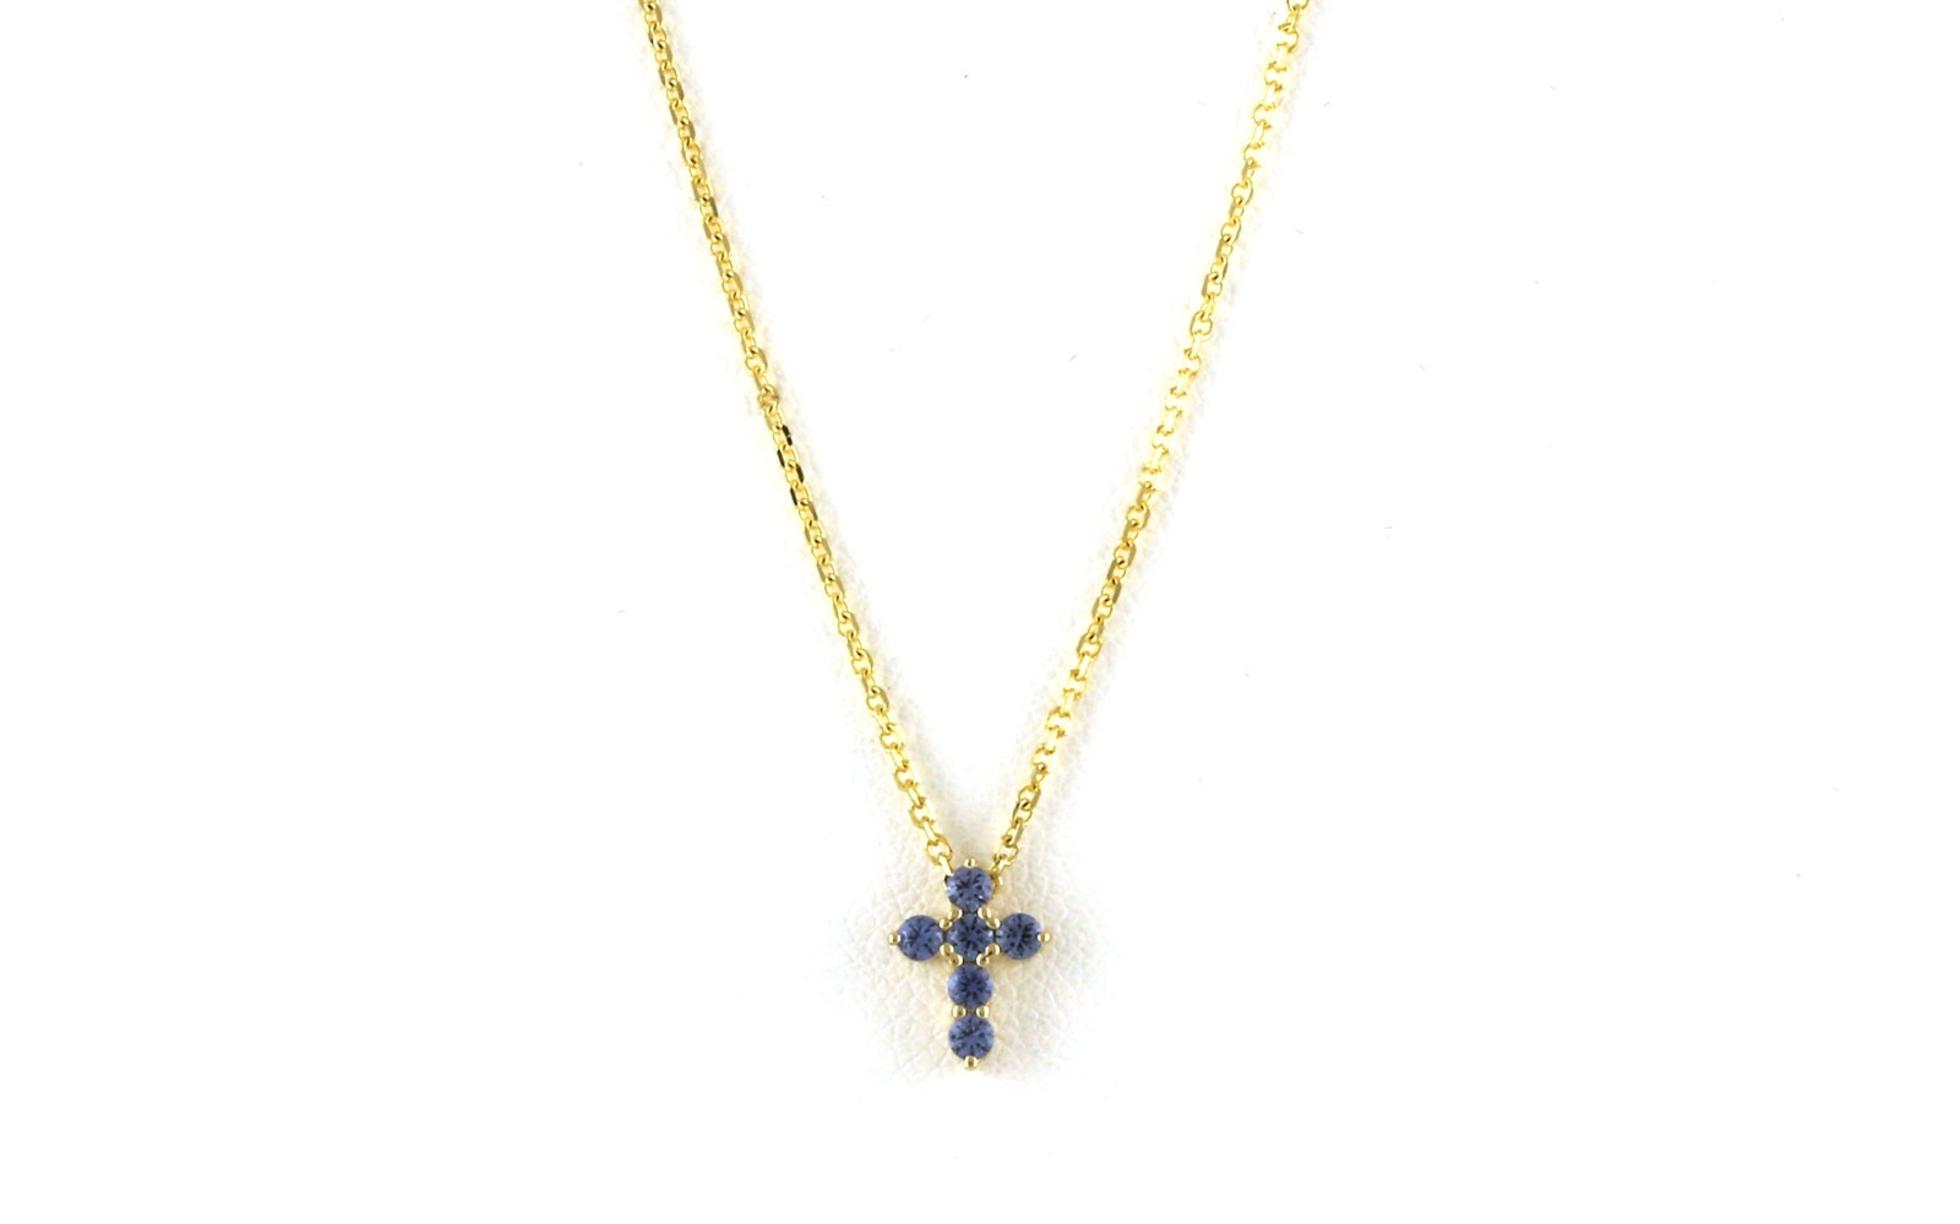 6-Stone Montana Yogo Sapphire Cross Necklace in Yellow Gold (0.24cts TWT)